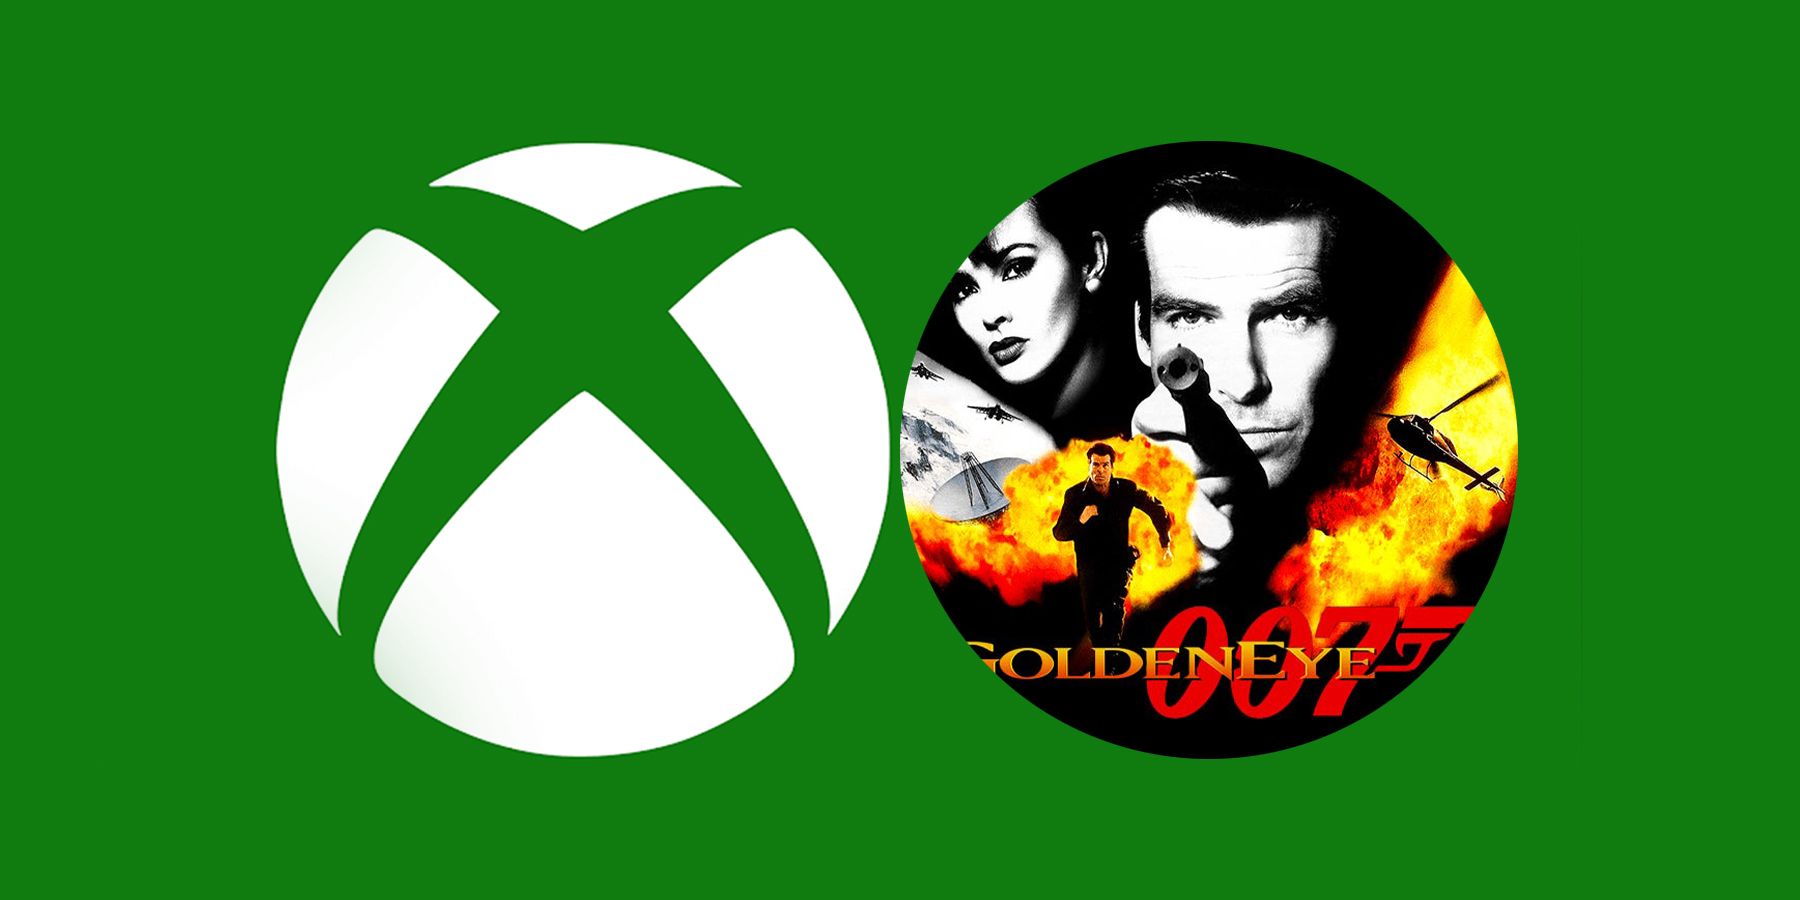 GoldenEye 007 is coming to Xbox on January 27th - Gaming - XboxEra